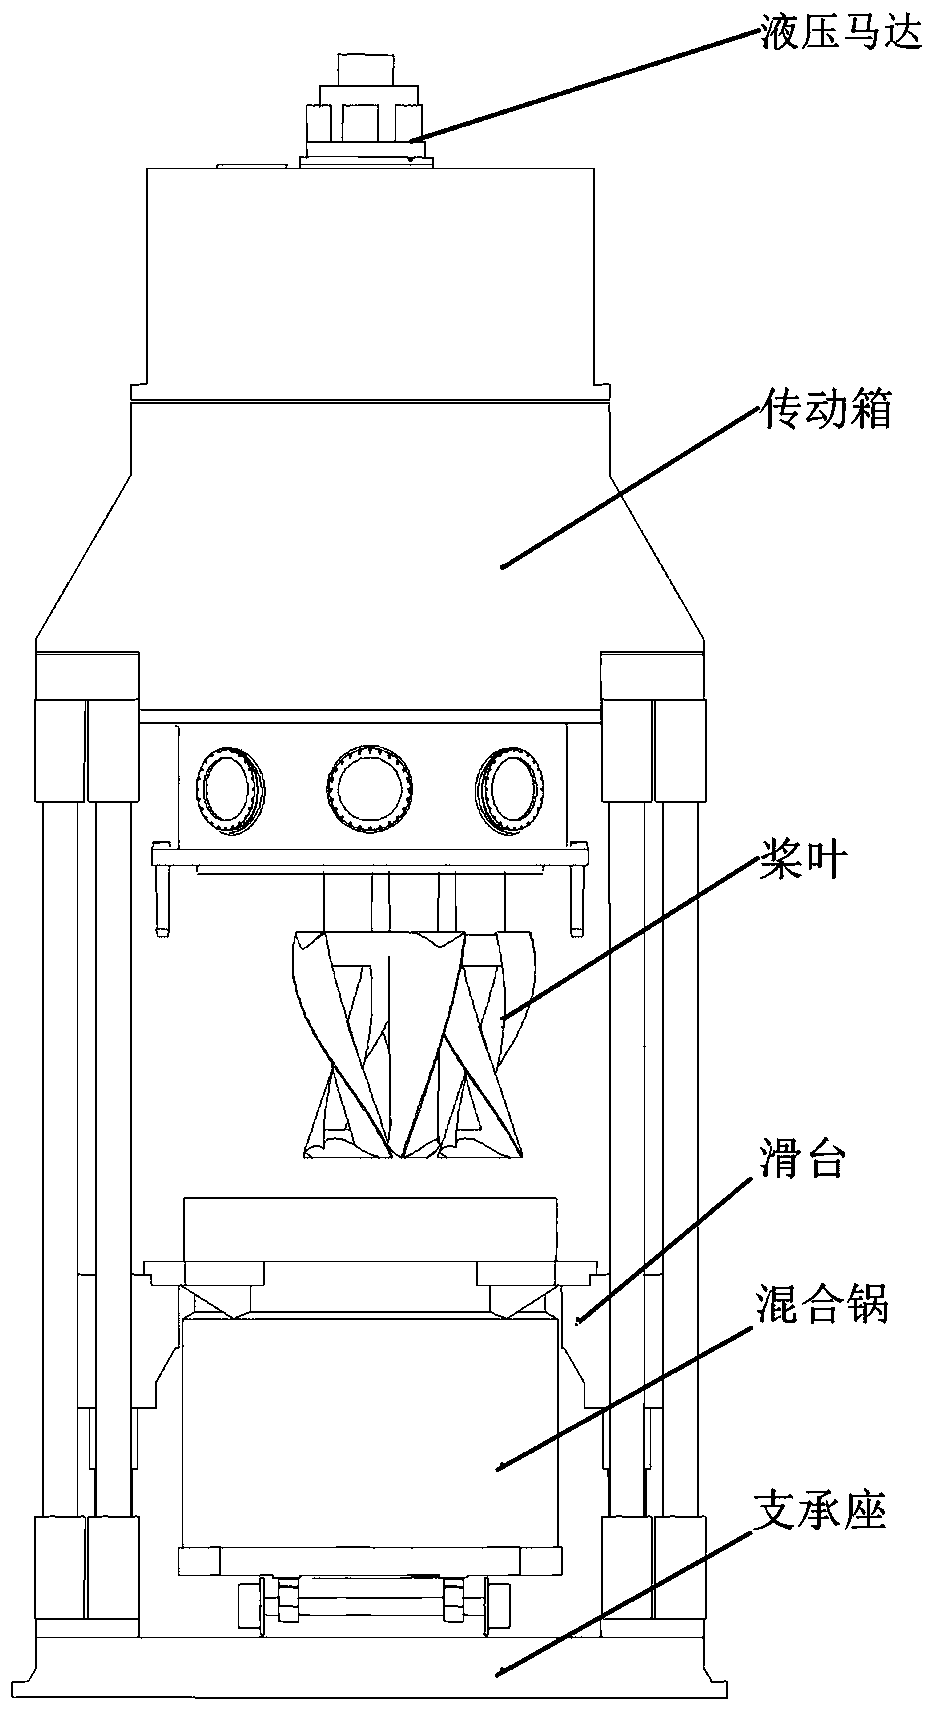 Mixing pot bottom discharge apparatus and application method thereof